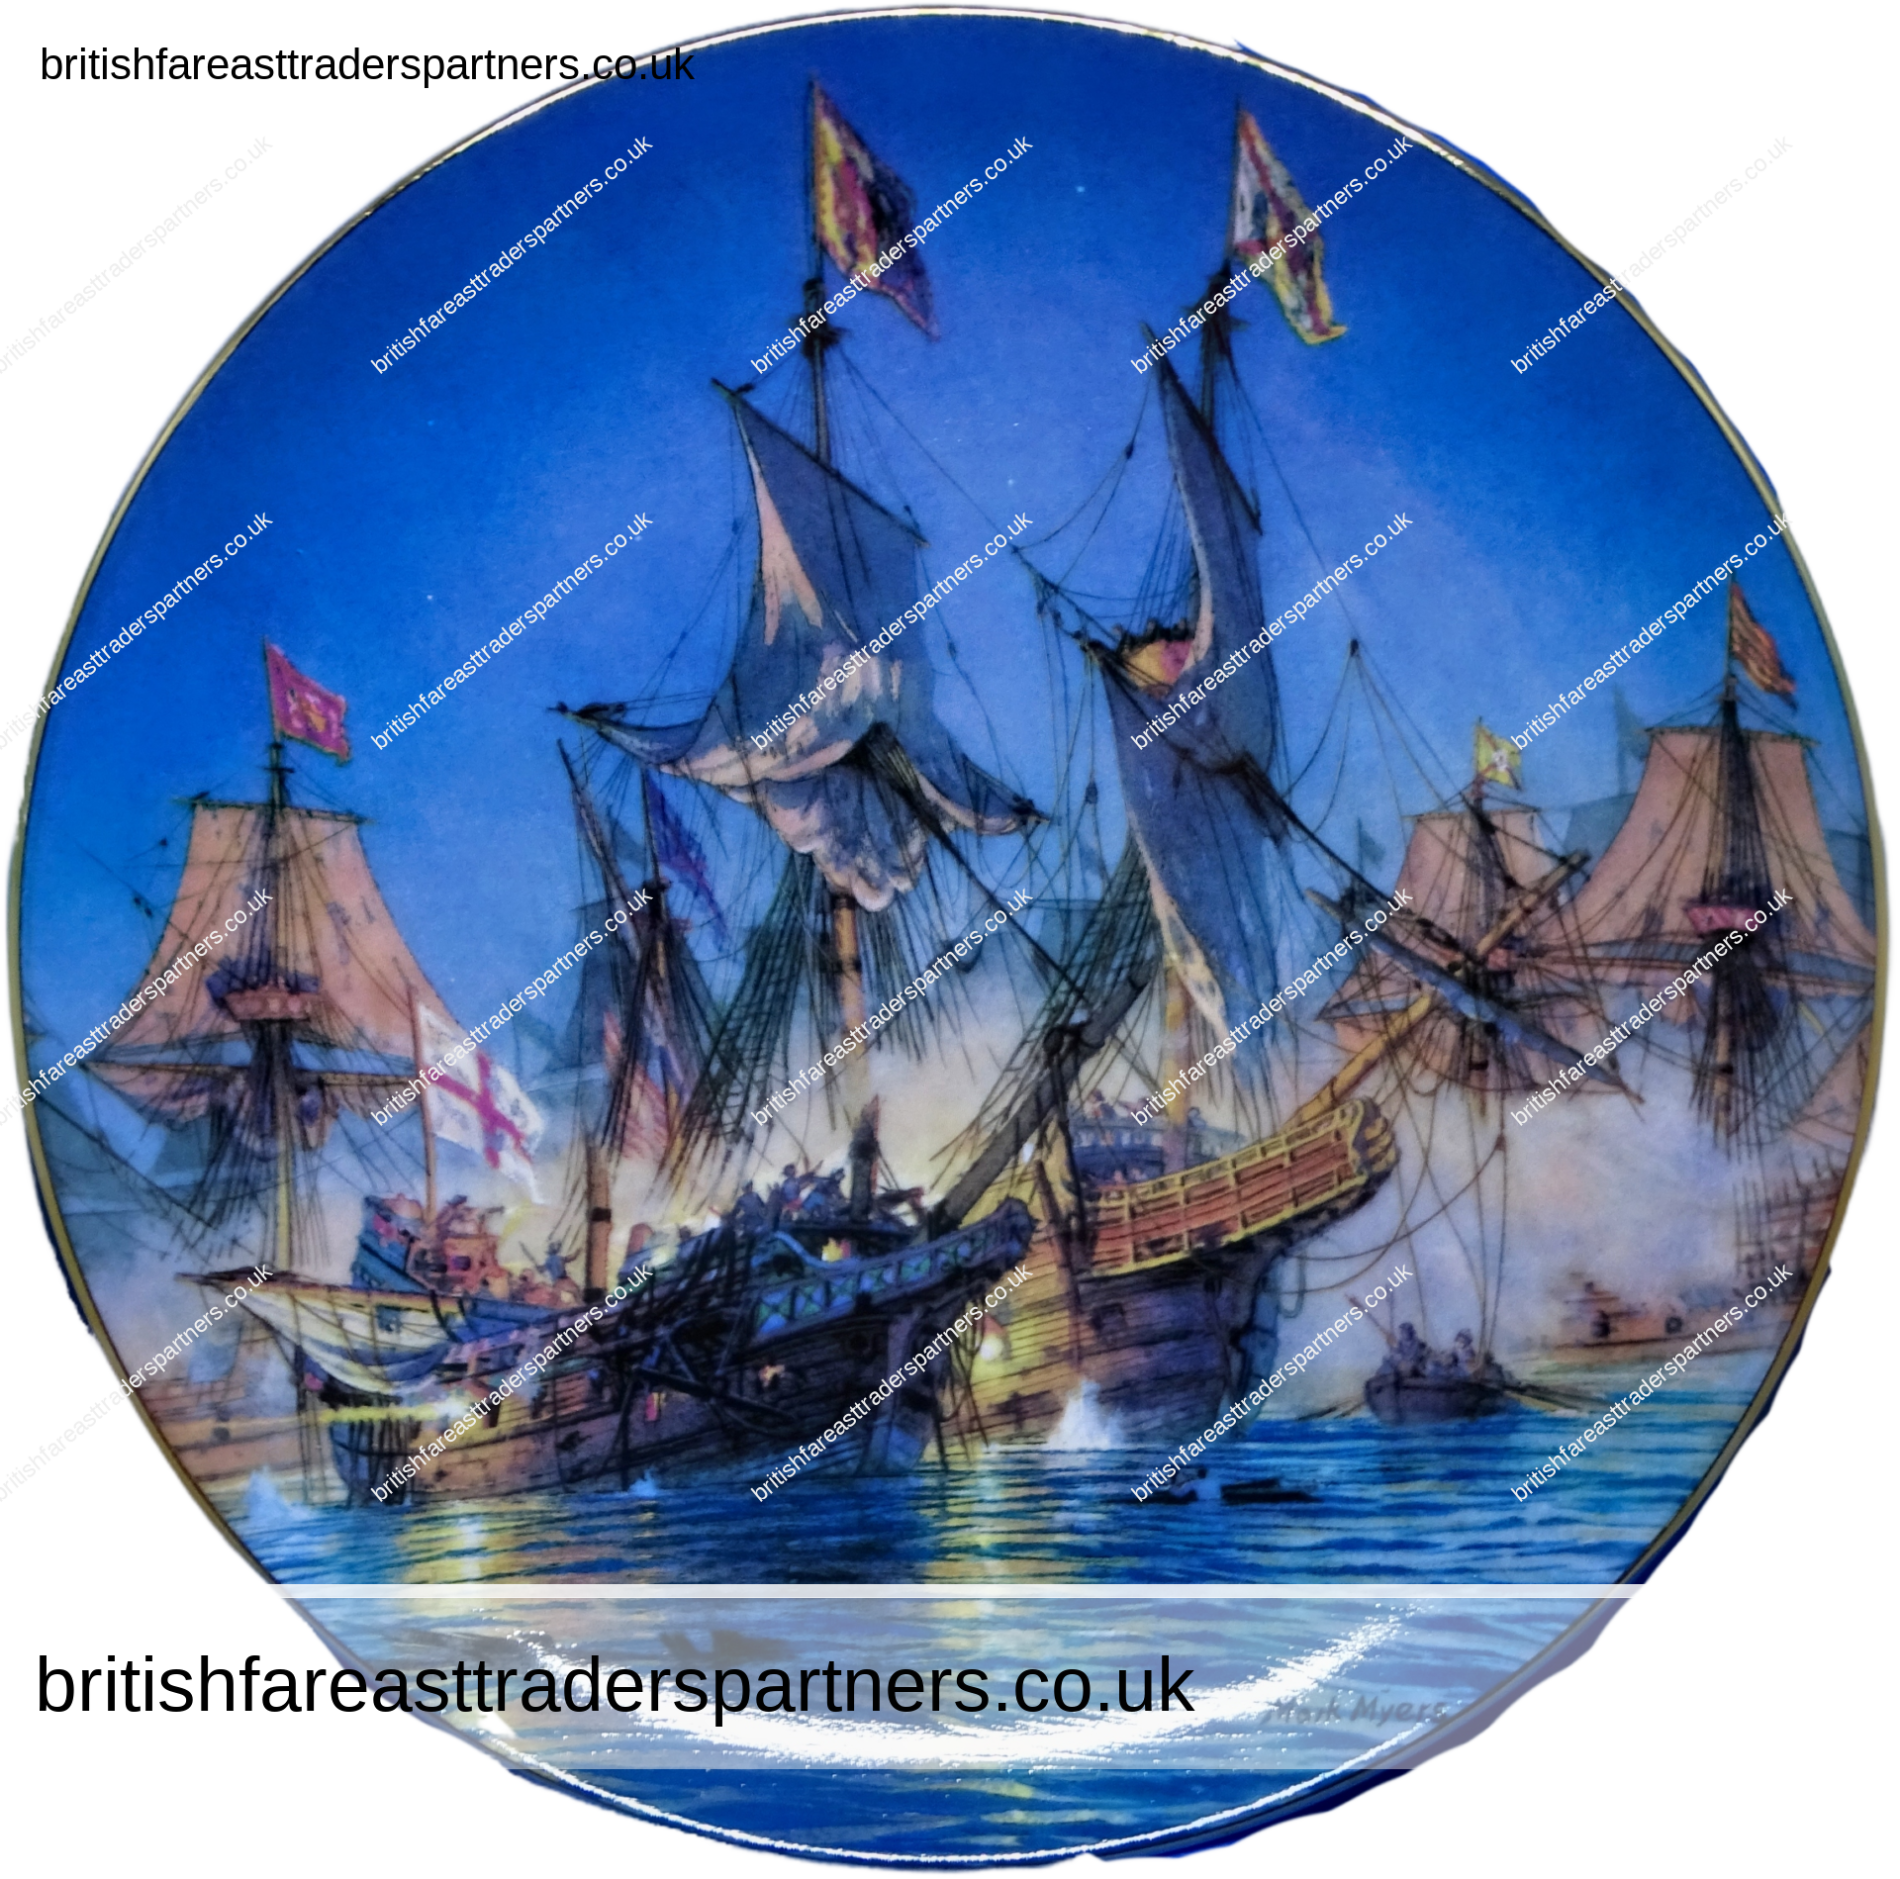 VINTAGE HAMILTON COLLECTION PLATE “GREAT BRITISH SEA BATTLES” BY MARK MYERS VINTAGE | COLLECTABLES | DECORATIVE PLATES | ENGLISH / ENGLAND  | FINE PORCELAIN | TRANSPORT | SAILING | SHIPS | NAVAL / NAUTICAL / MARITIME |  LIFESTYLE | HERITAGE | CULTURE